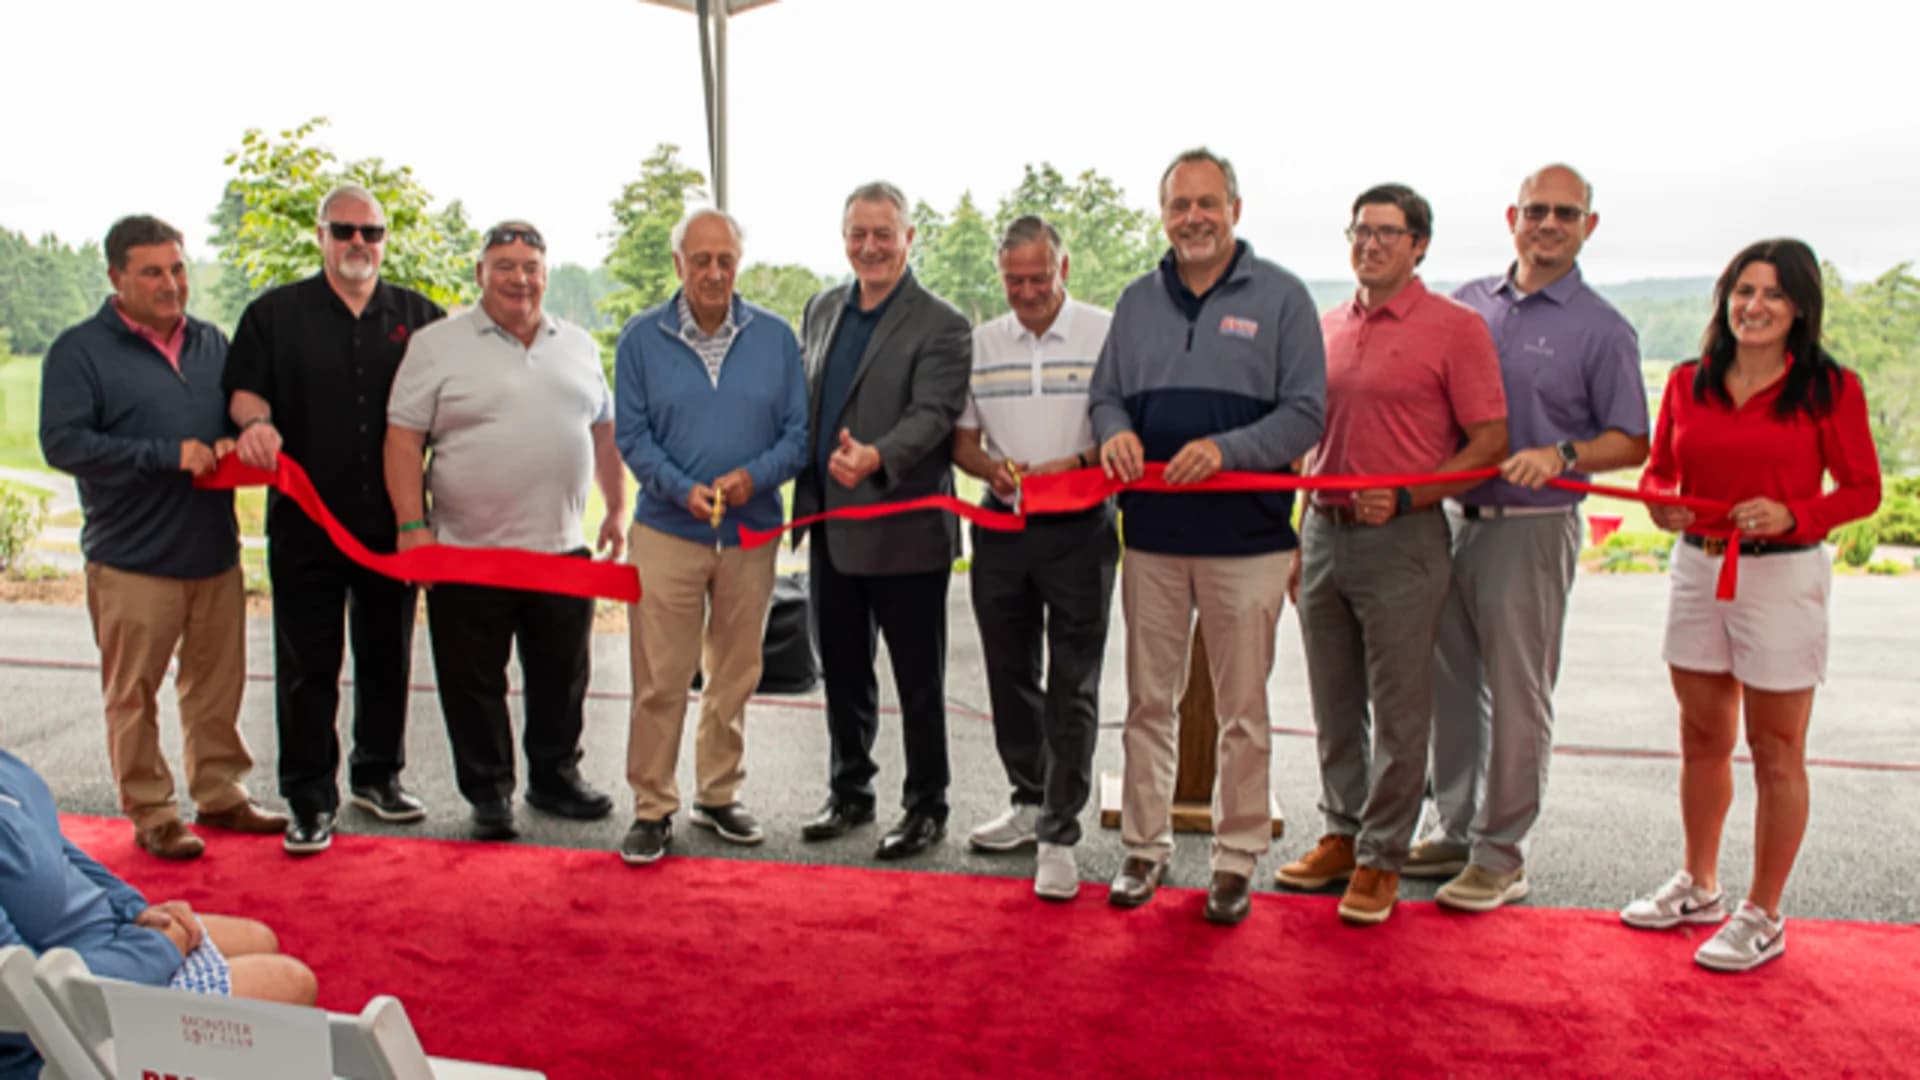 Monster Golf Club officially opens at Resorts World Catskills